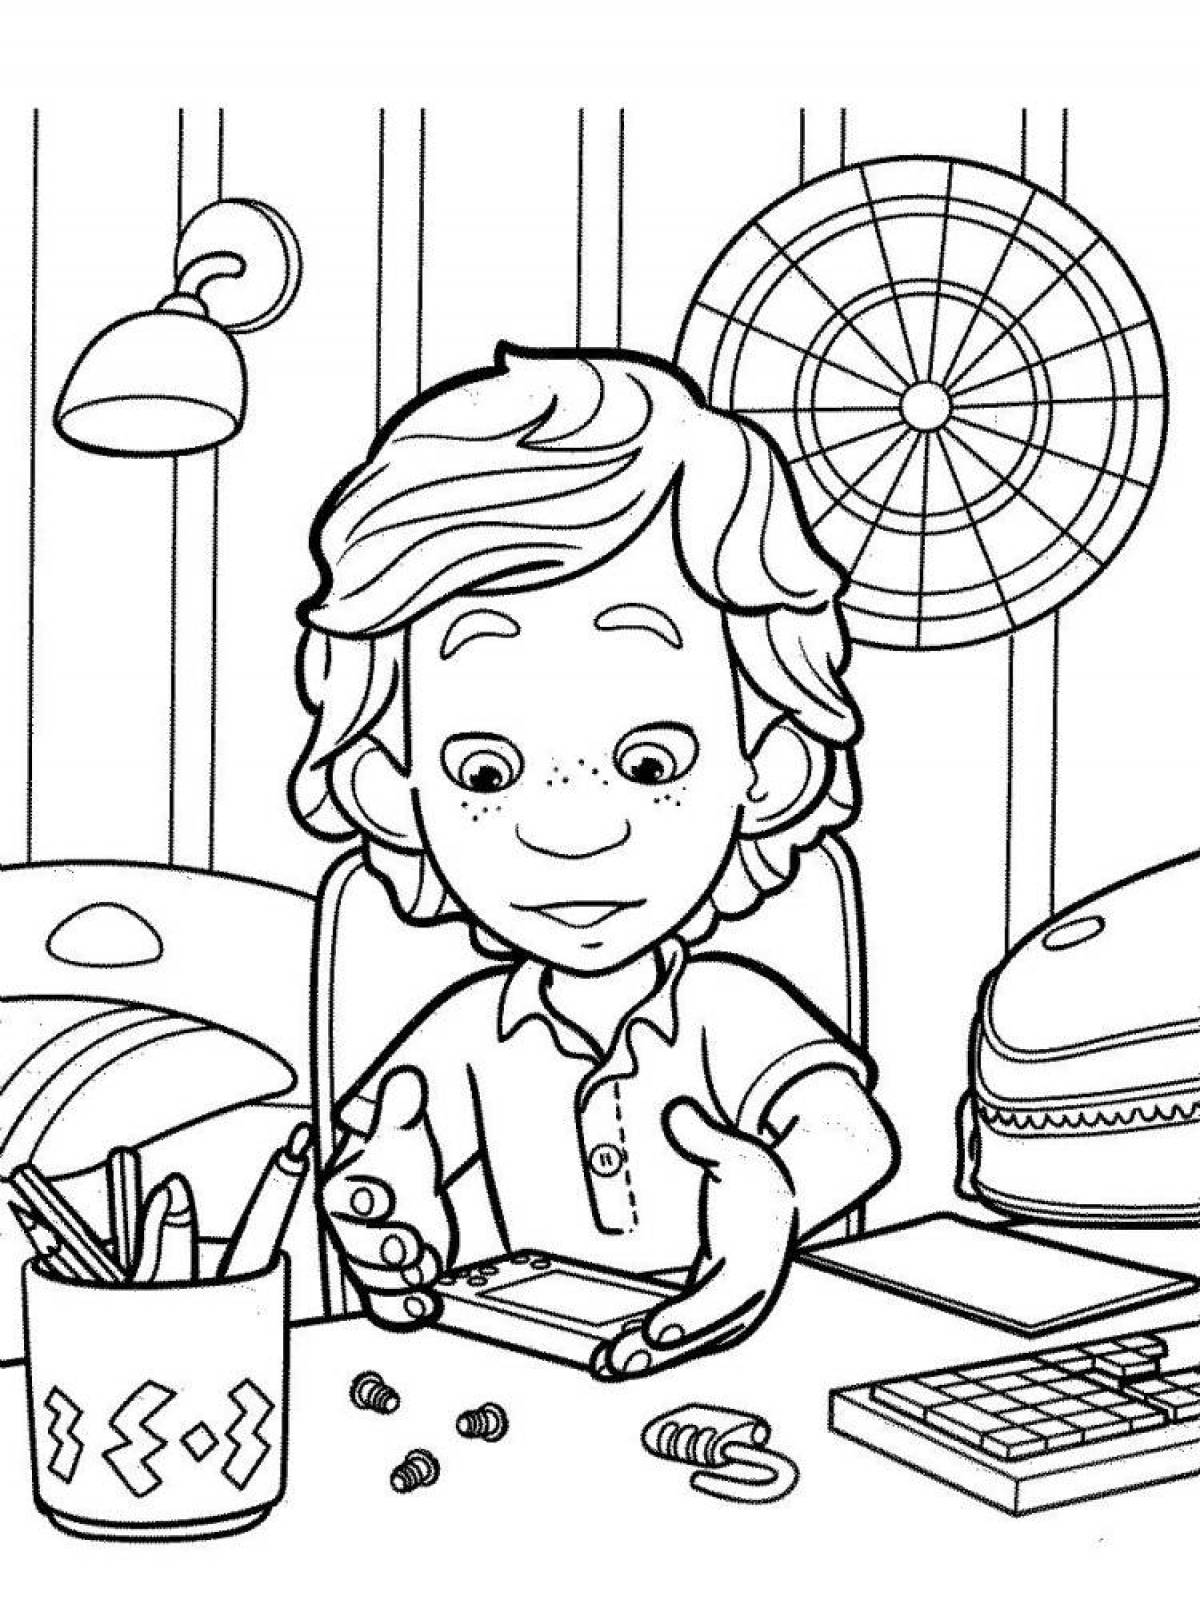 Turn on coloring #1